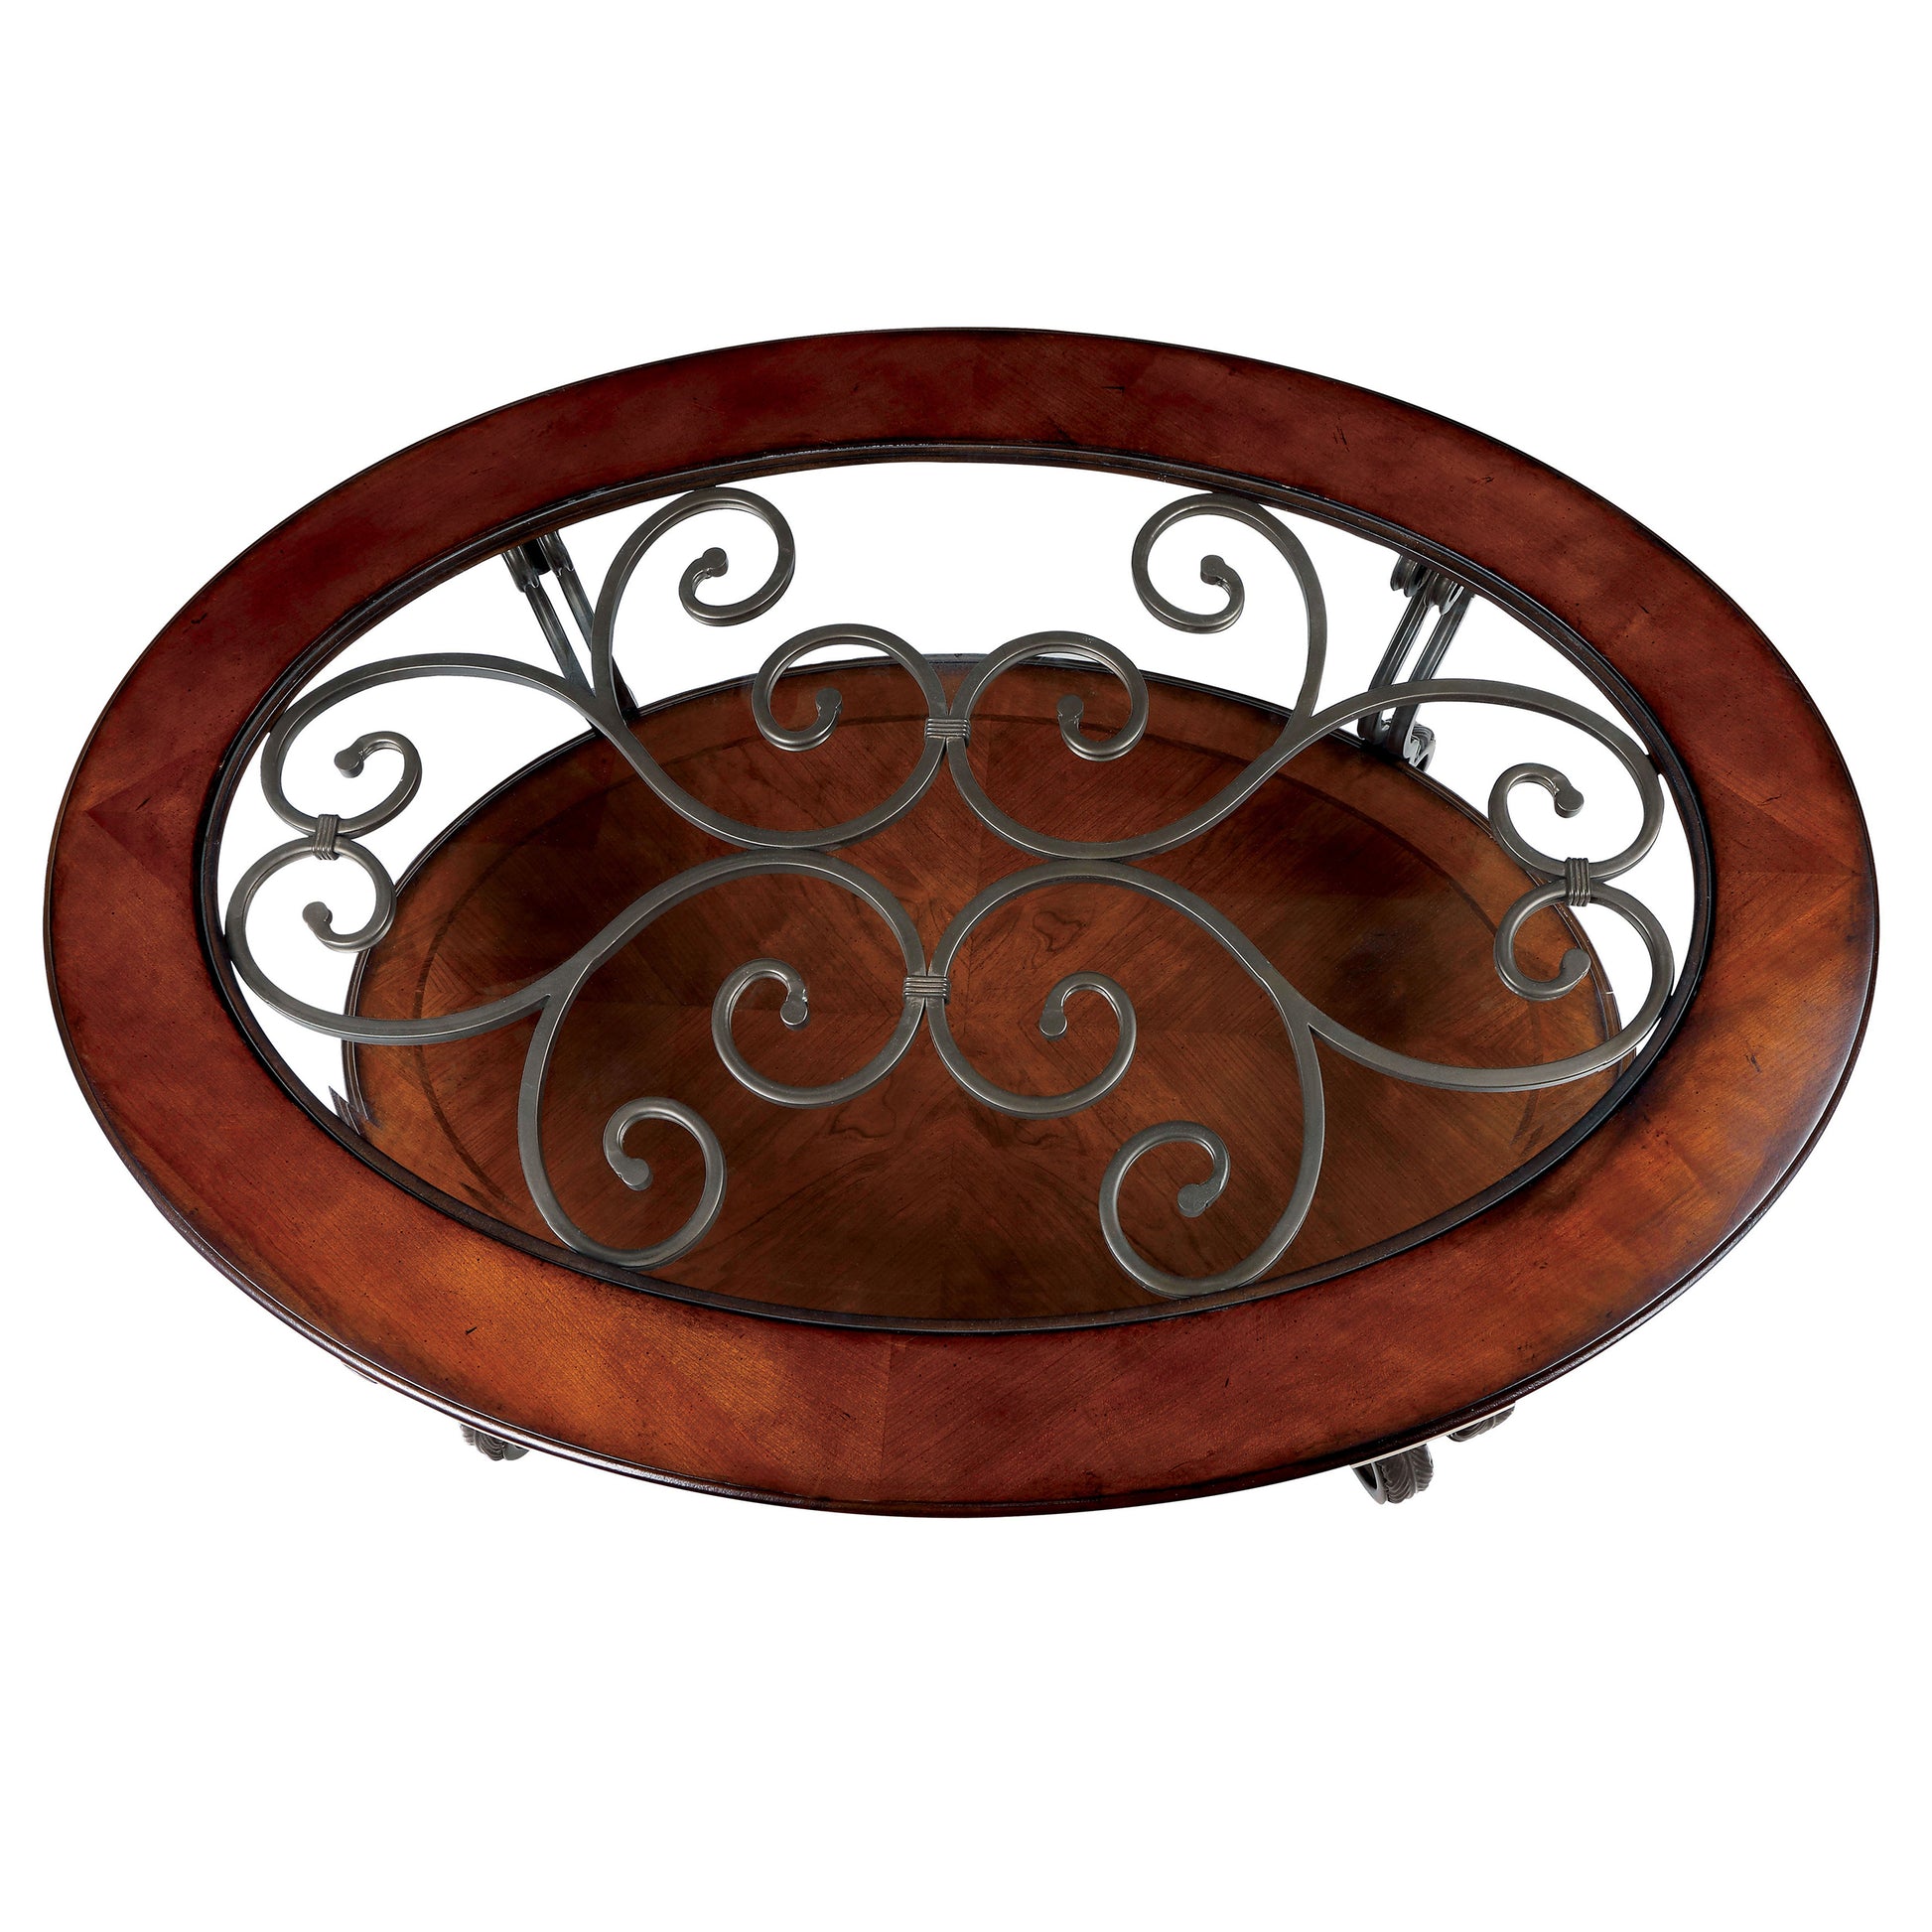 Angled bird's eye tabletop view of a traditional brown cherry and glass oval coffee table with a lower shelf on a white background